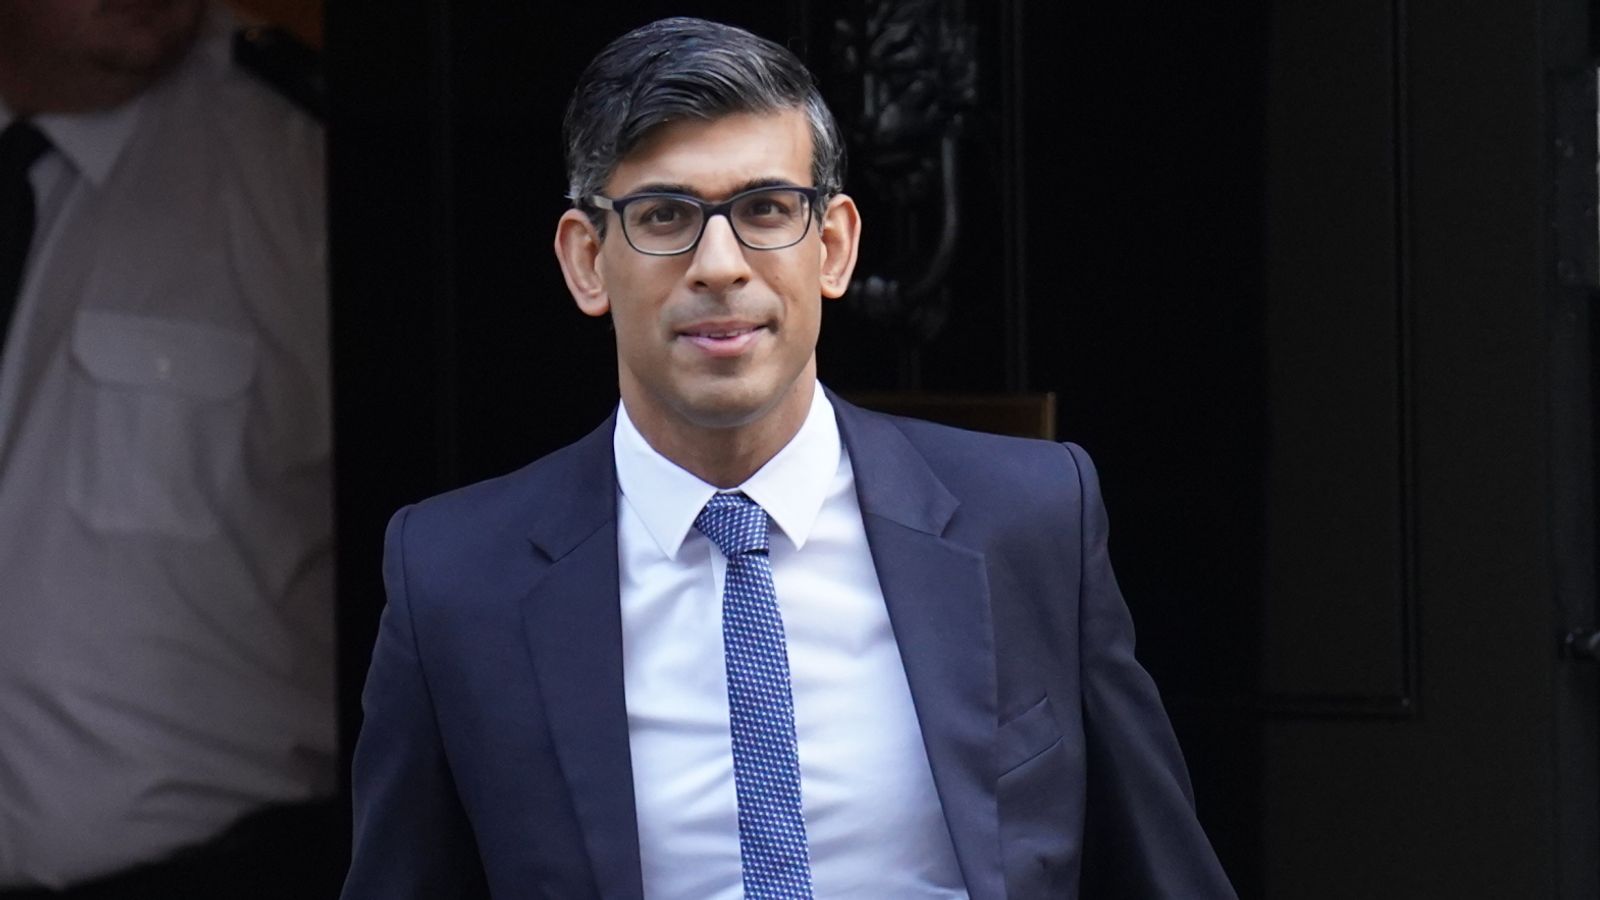 Rishi Sunak sets out yet more priorities with cabinet reshuffle and Whitehall shake-up - the public will wait to see what's delivered